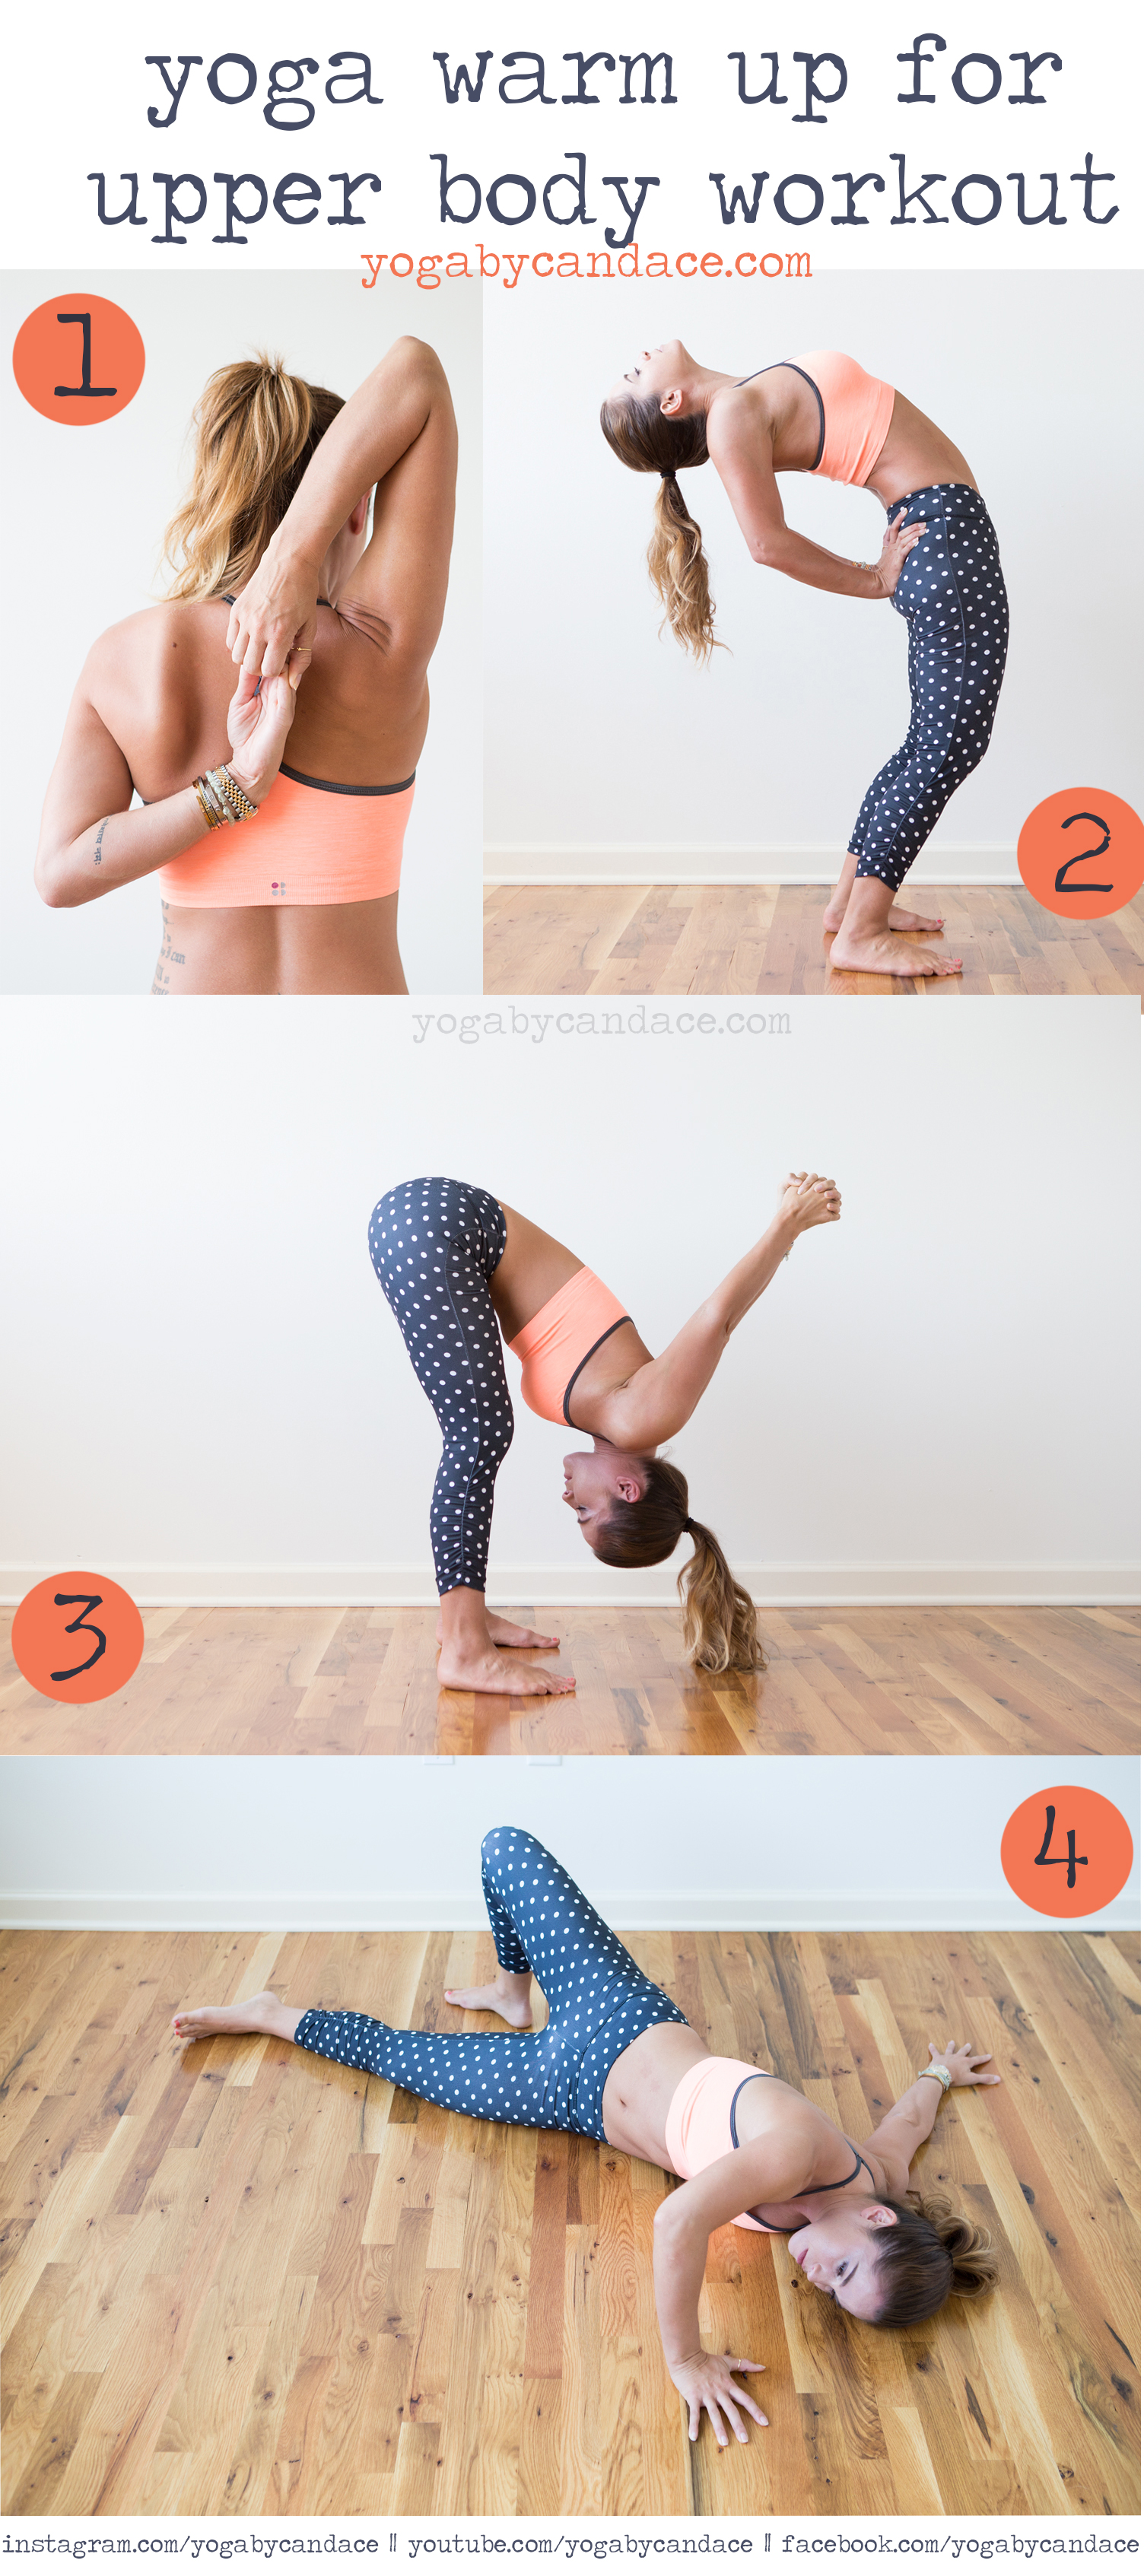 Yoga Poses That Warm the Body and Soul - Kristin McGee